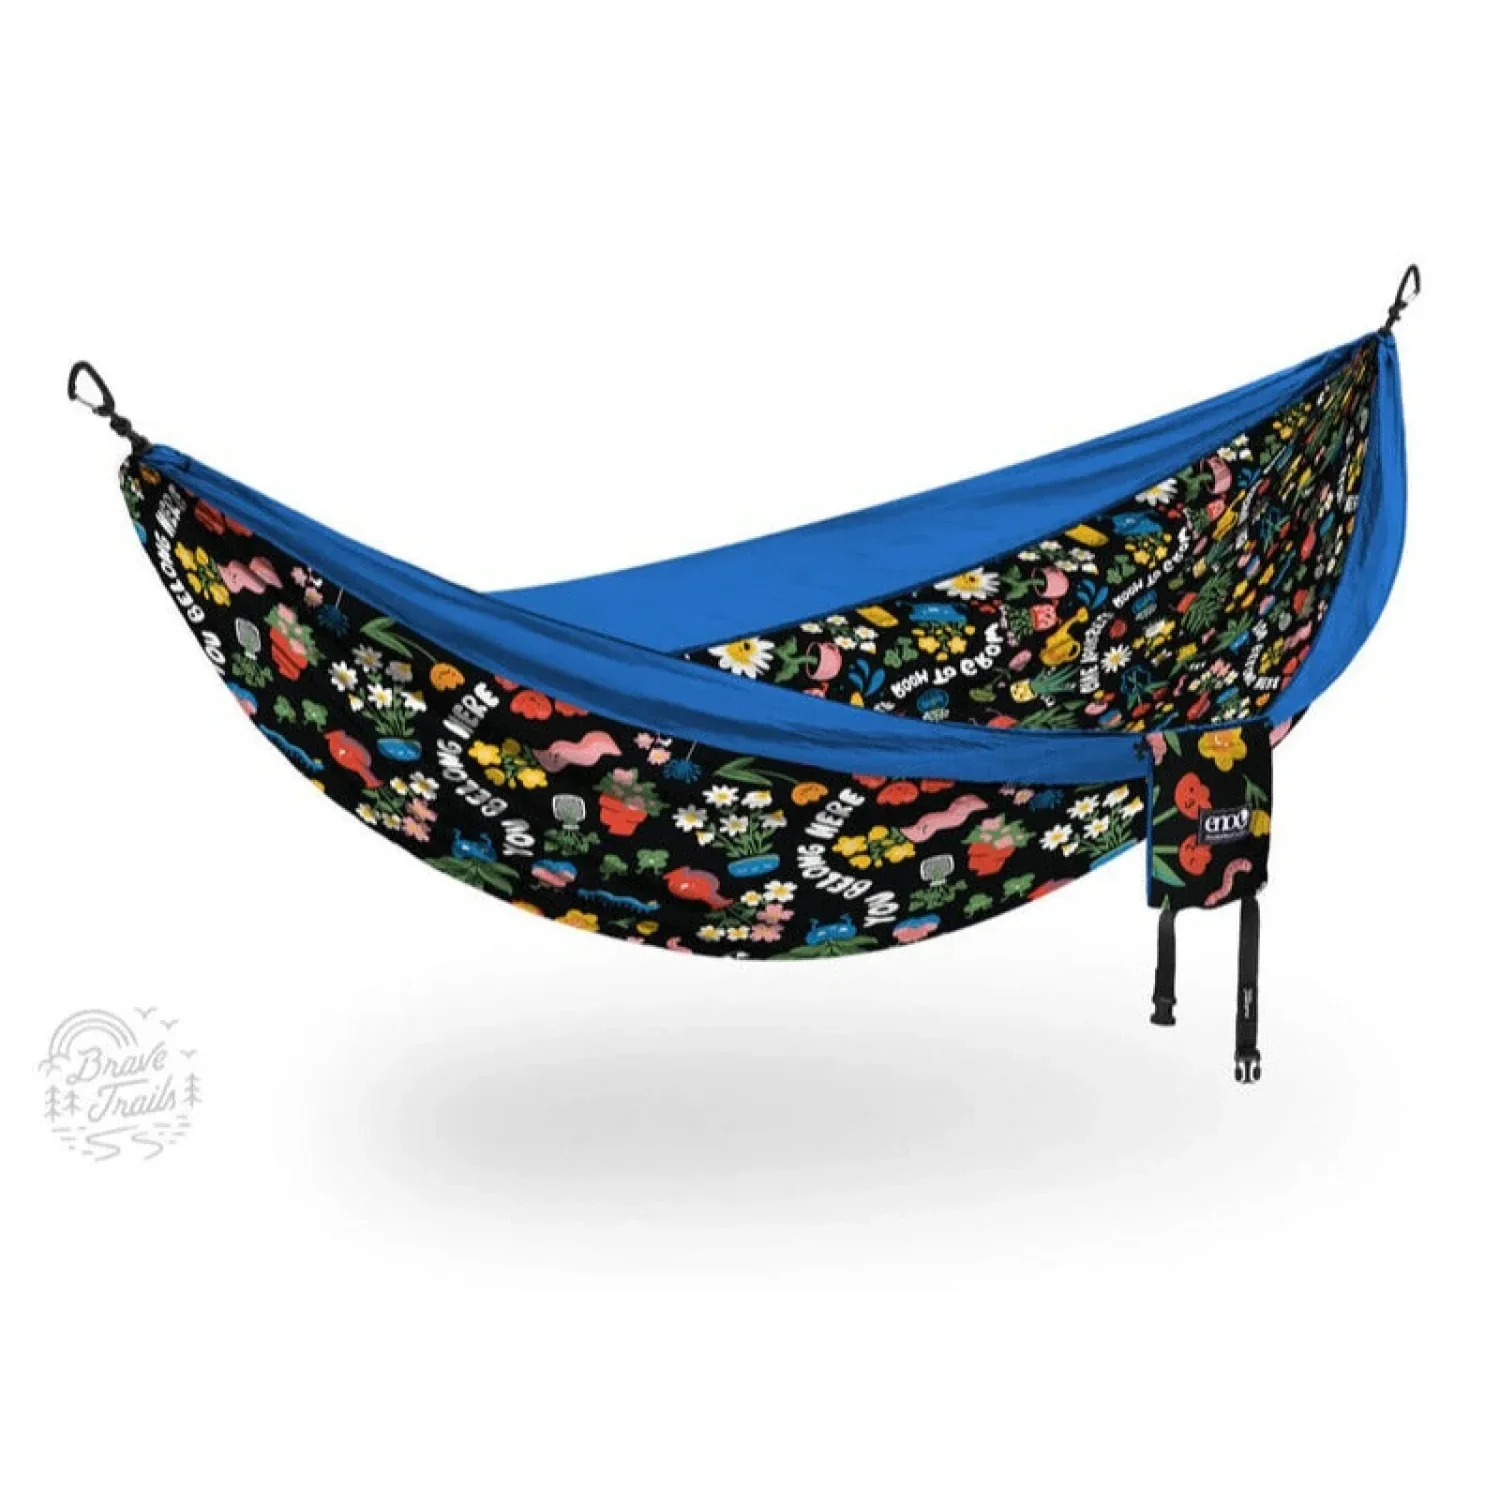 Eagles Nest Outfitters 17. CAMPING ACCESS - HAMMOCKS DoubleNest Printed Hammock - Giving Back ROOM TO GROW - BRAVE TRAILS | TEAL